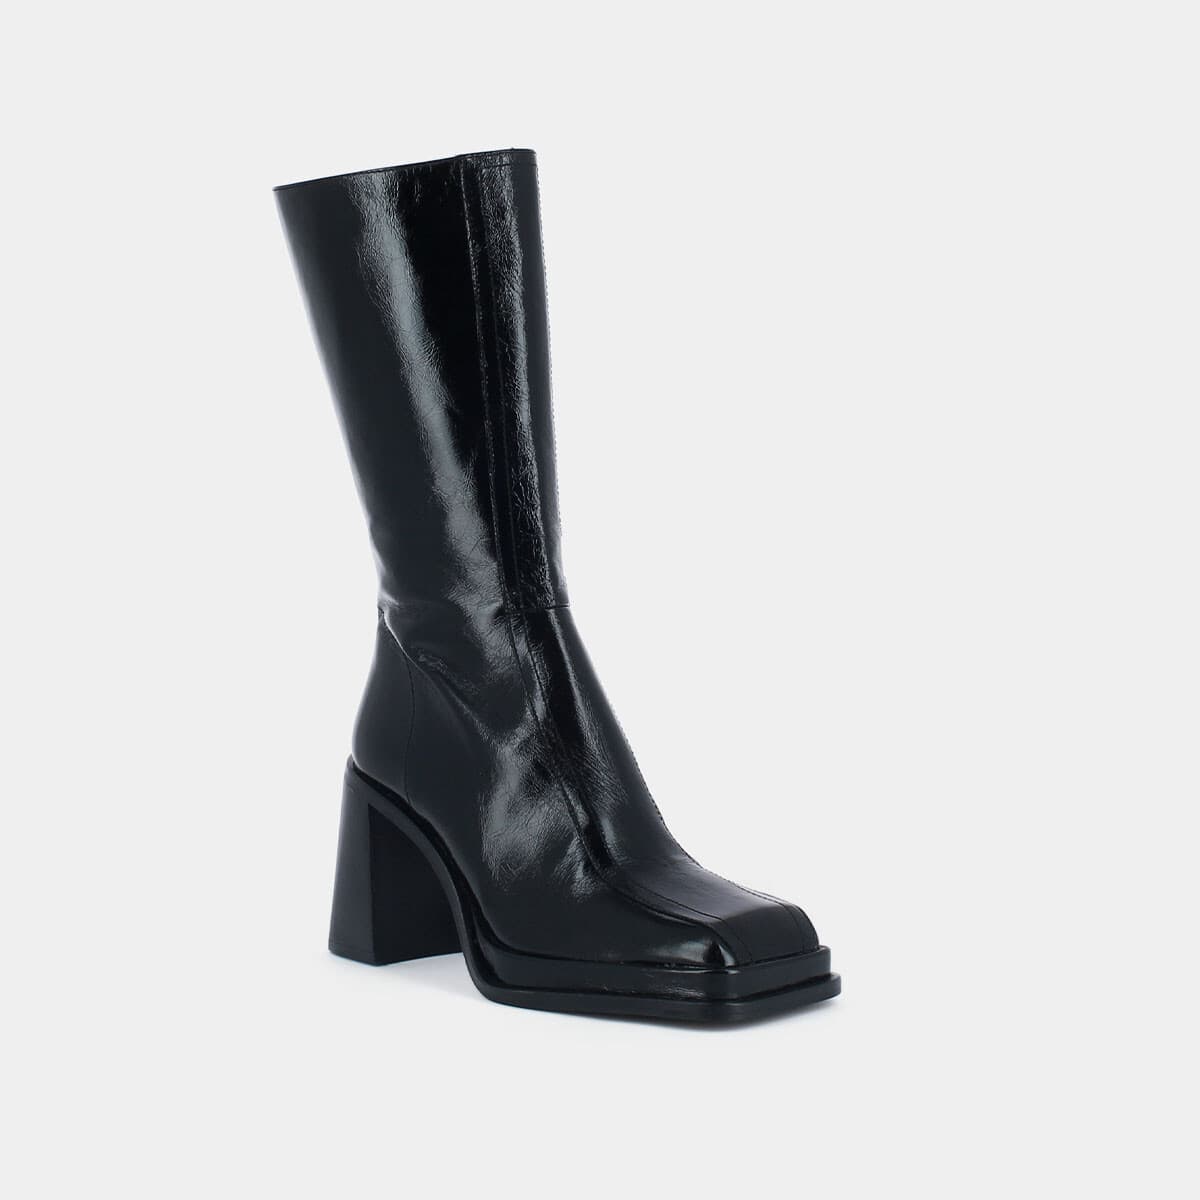 Boots with heel, platform and square toe in glazed black leather